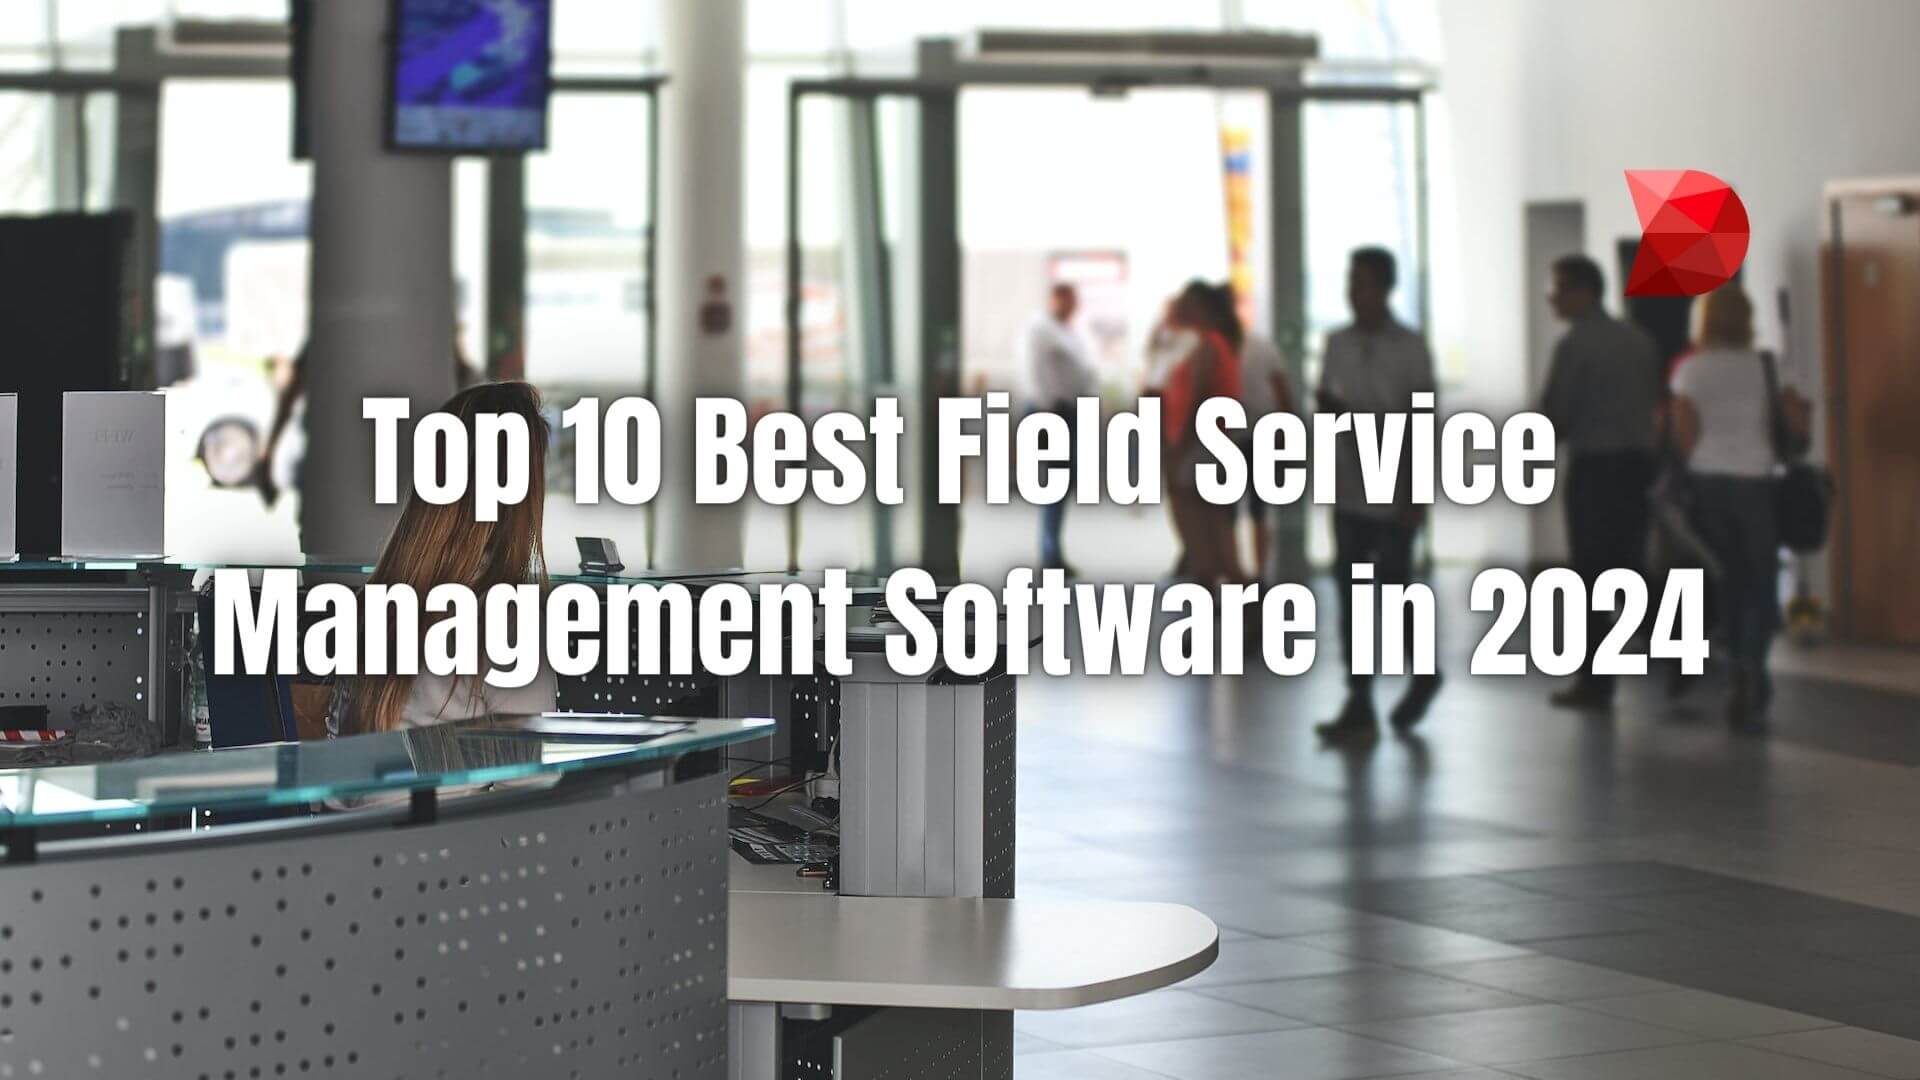 We created this list of the best field service management software in 2024 for you to know which ones fit your business needs. Learn more!